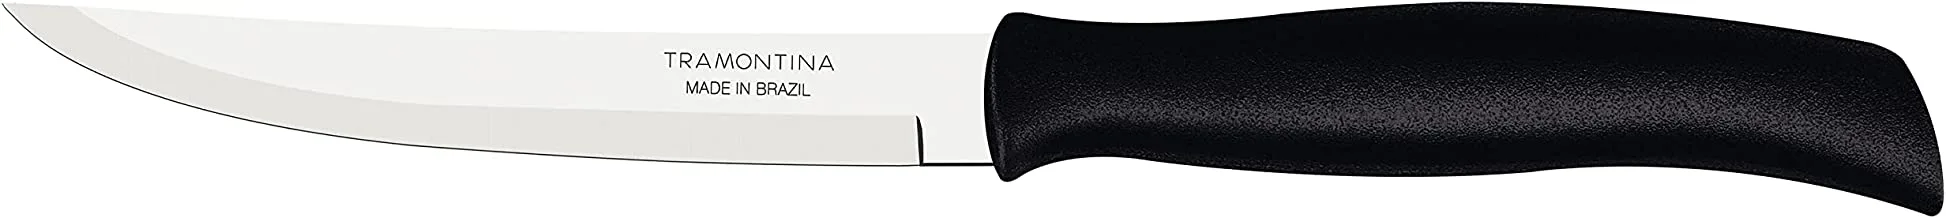 Tramontina Athus 5 Inches Steak Knife with Plain Edge Stainless Steel Blade and Black Polypropylene Handle